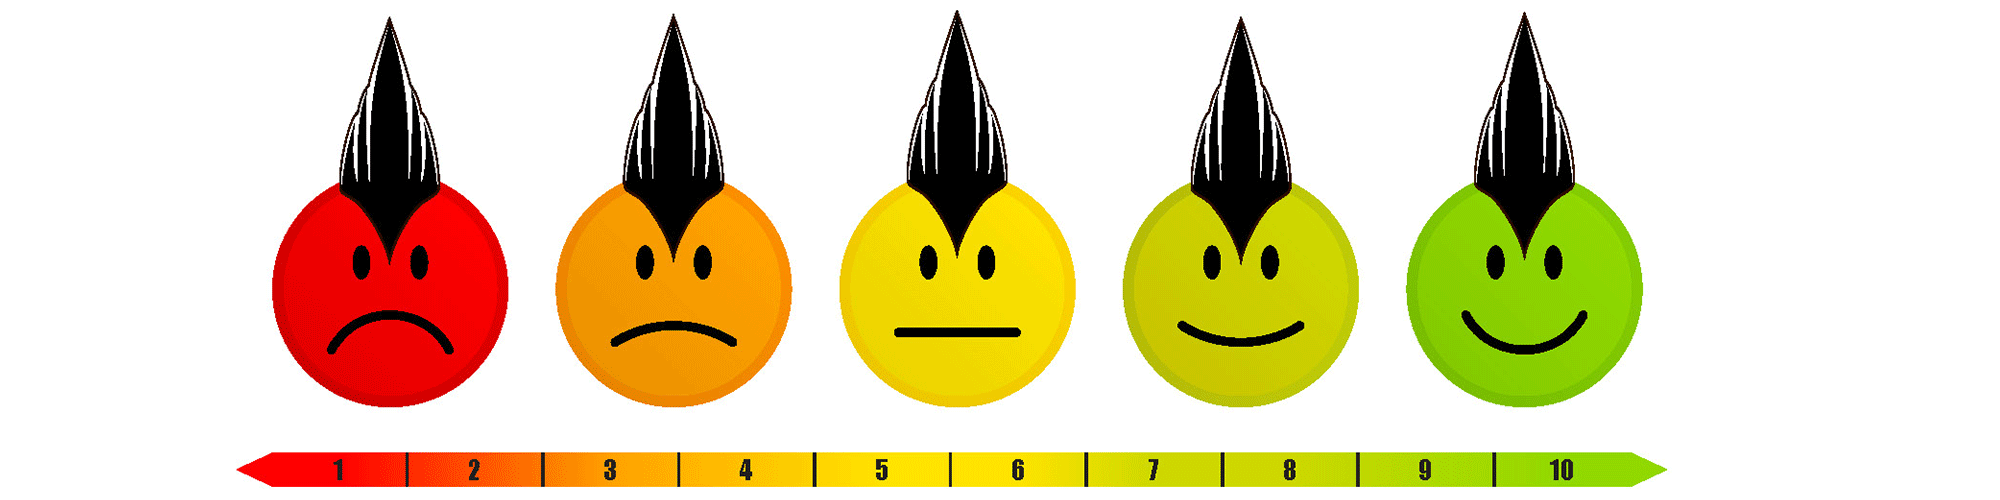 Scale of being happy or sad